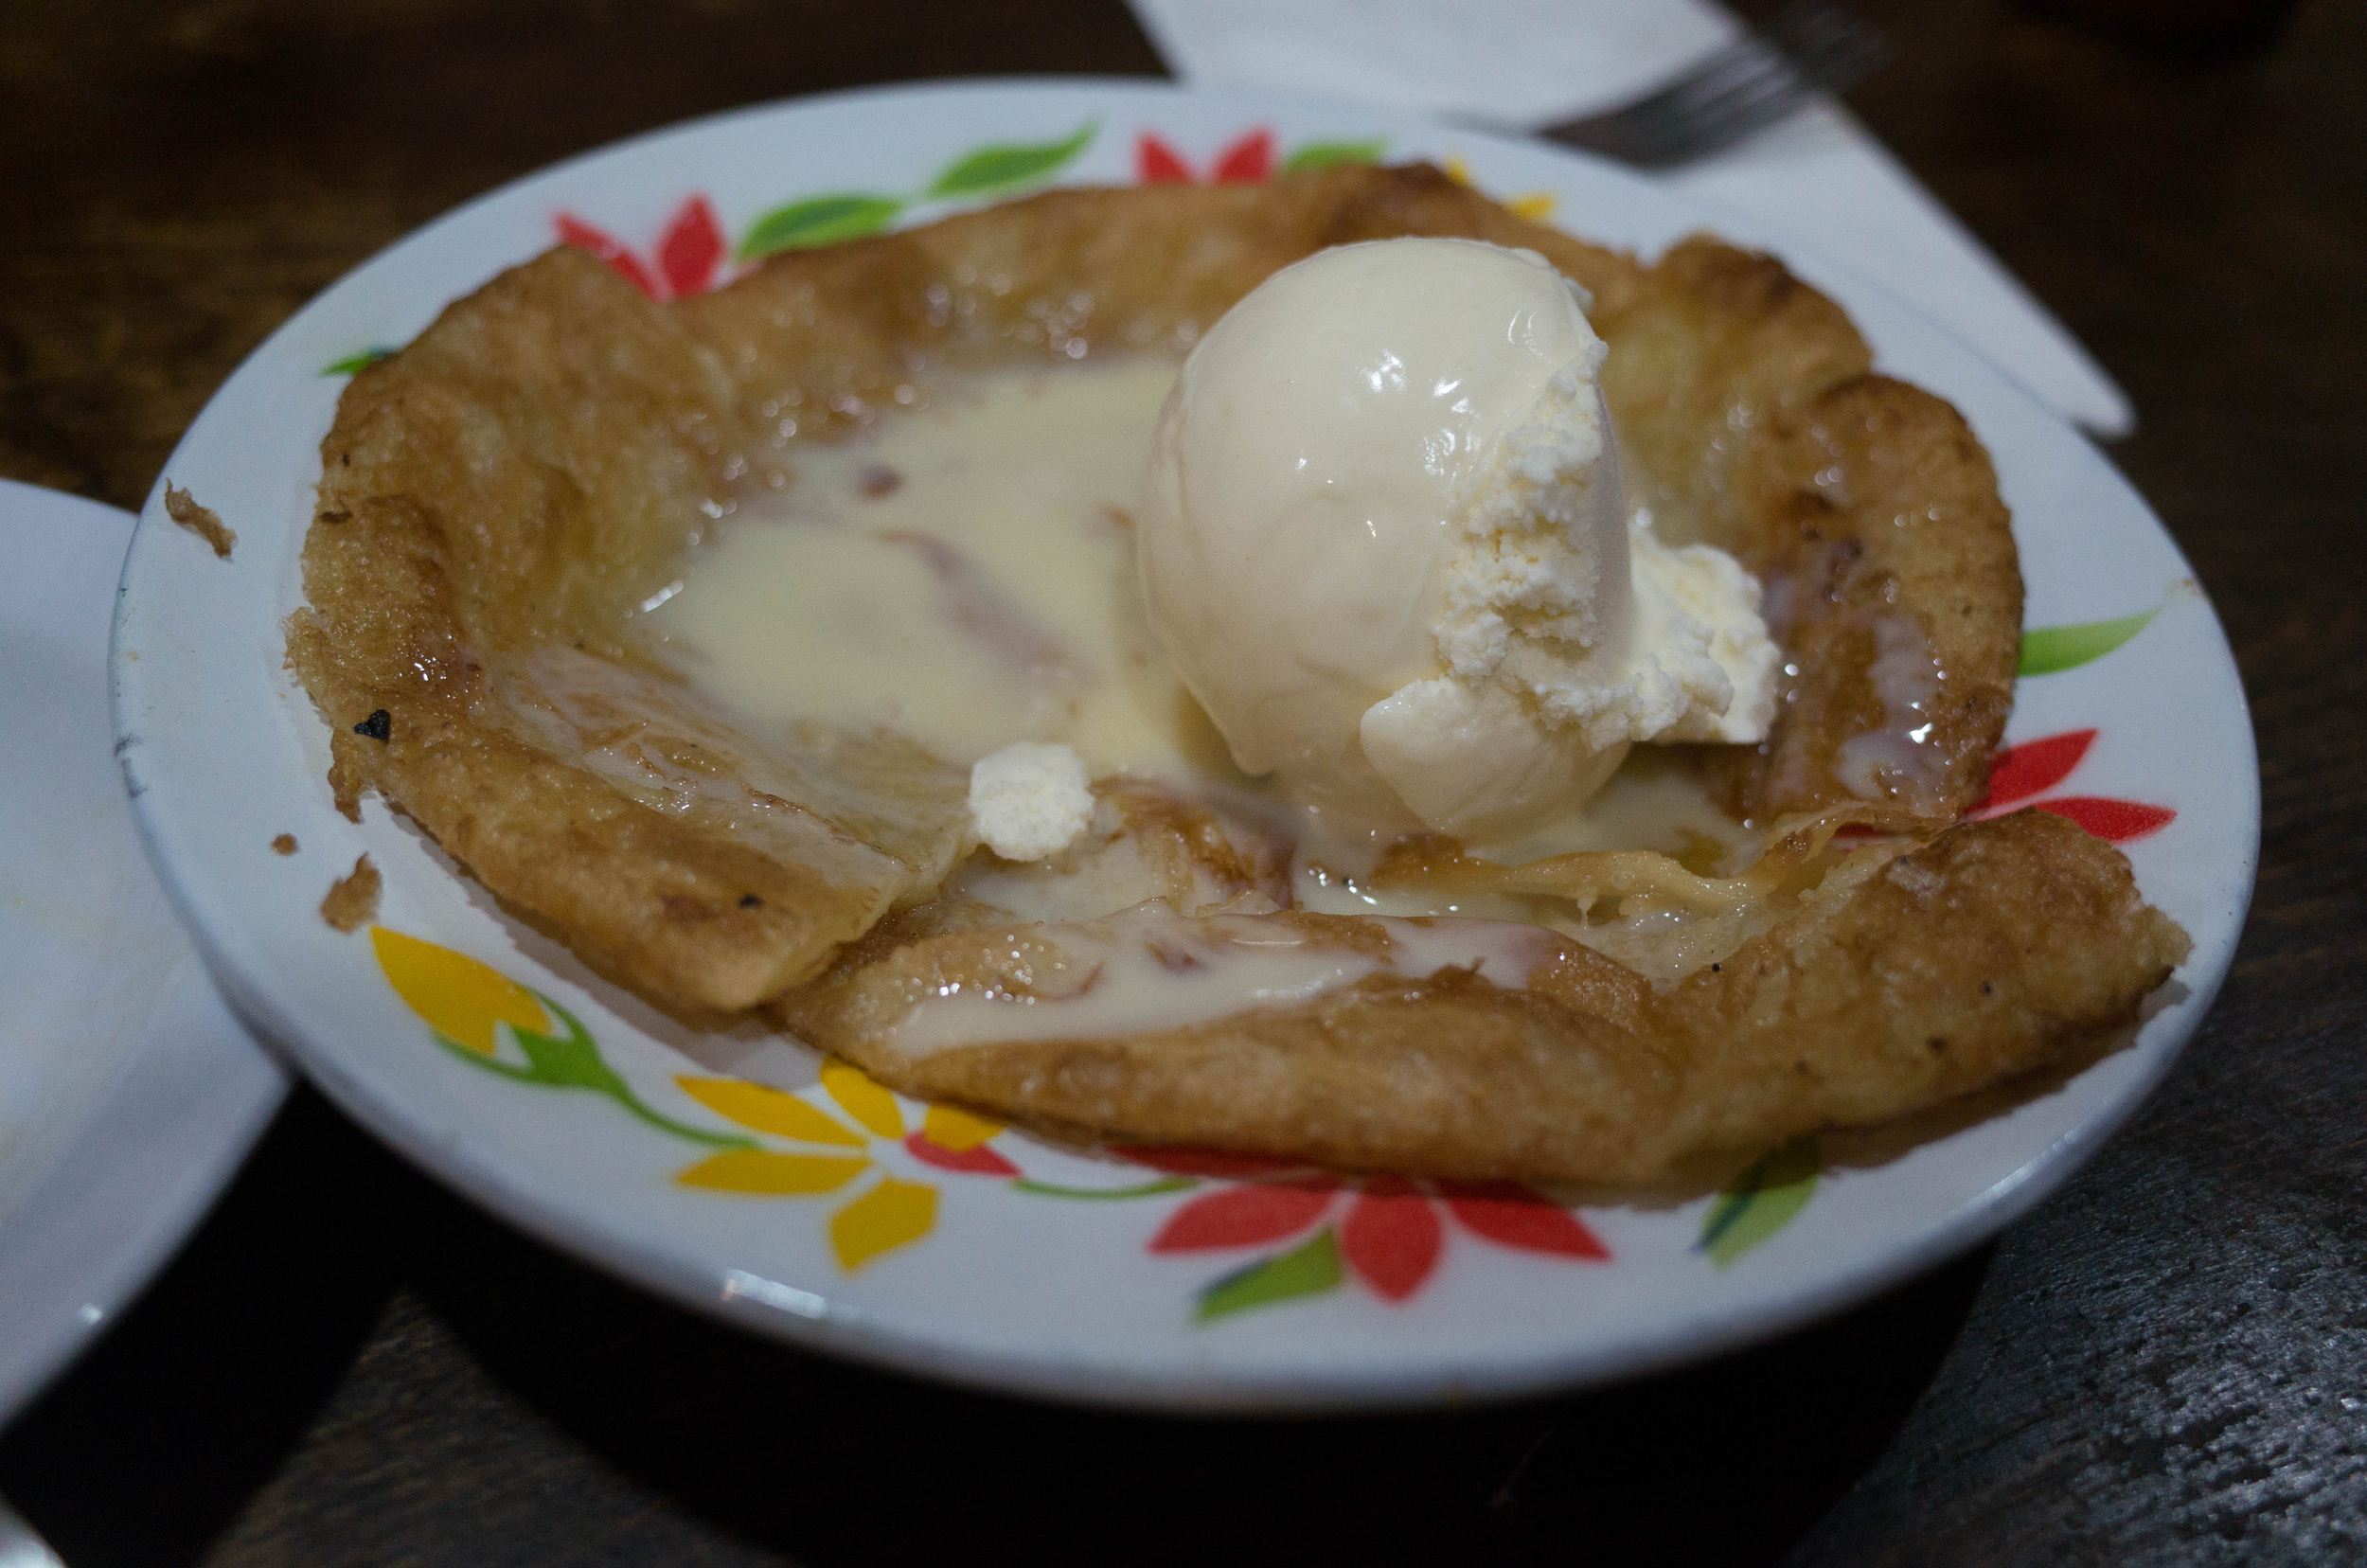  Roti with condensed milk and ice cream, one last unexpected stunner of a dish. We almost got in a fist fight over the last bites. 